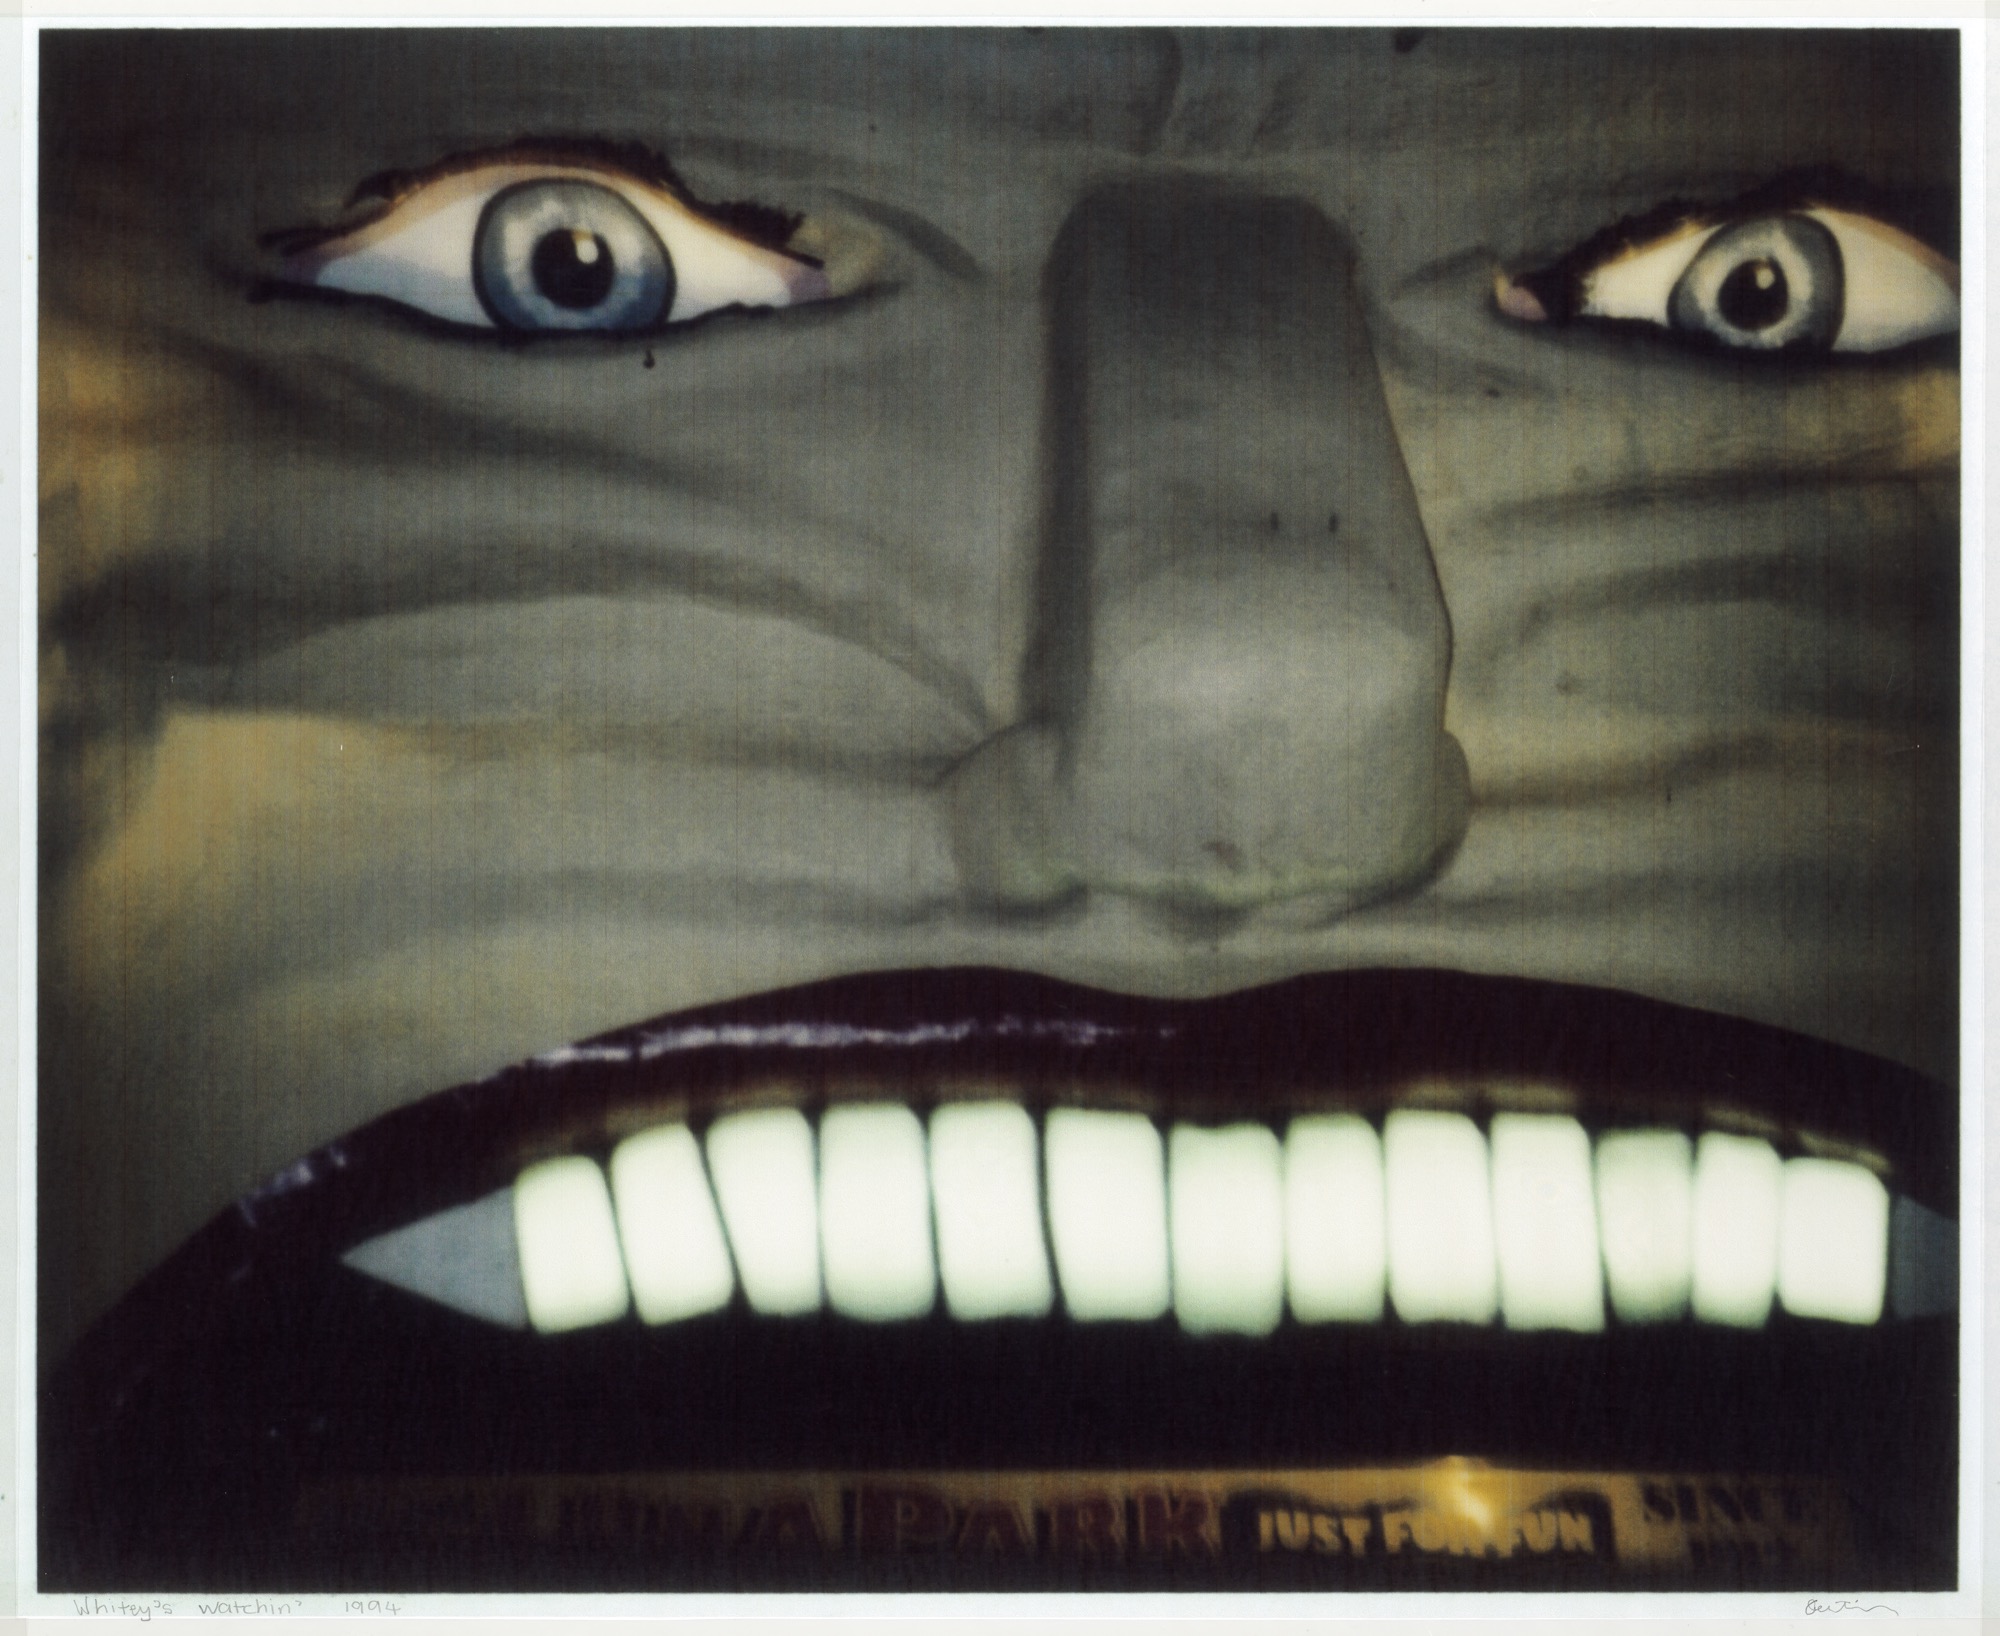 Destiny Deacon, <em>Whitey’s watchin’</em>. Colour photographic print, 1994, 26 × 21 cm, H99.222. Courtesy of the artist and Roslyn Oxley Gallery, Sydney.